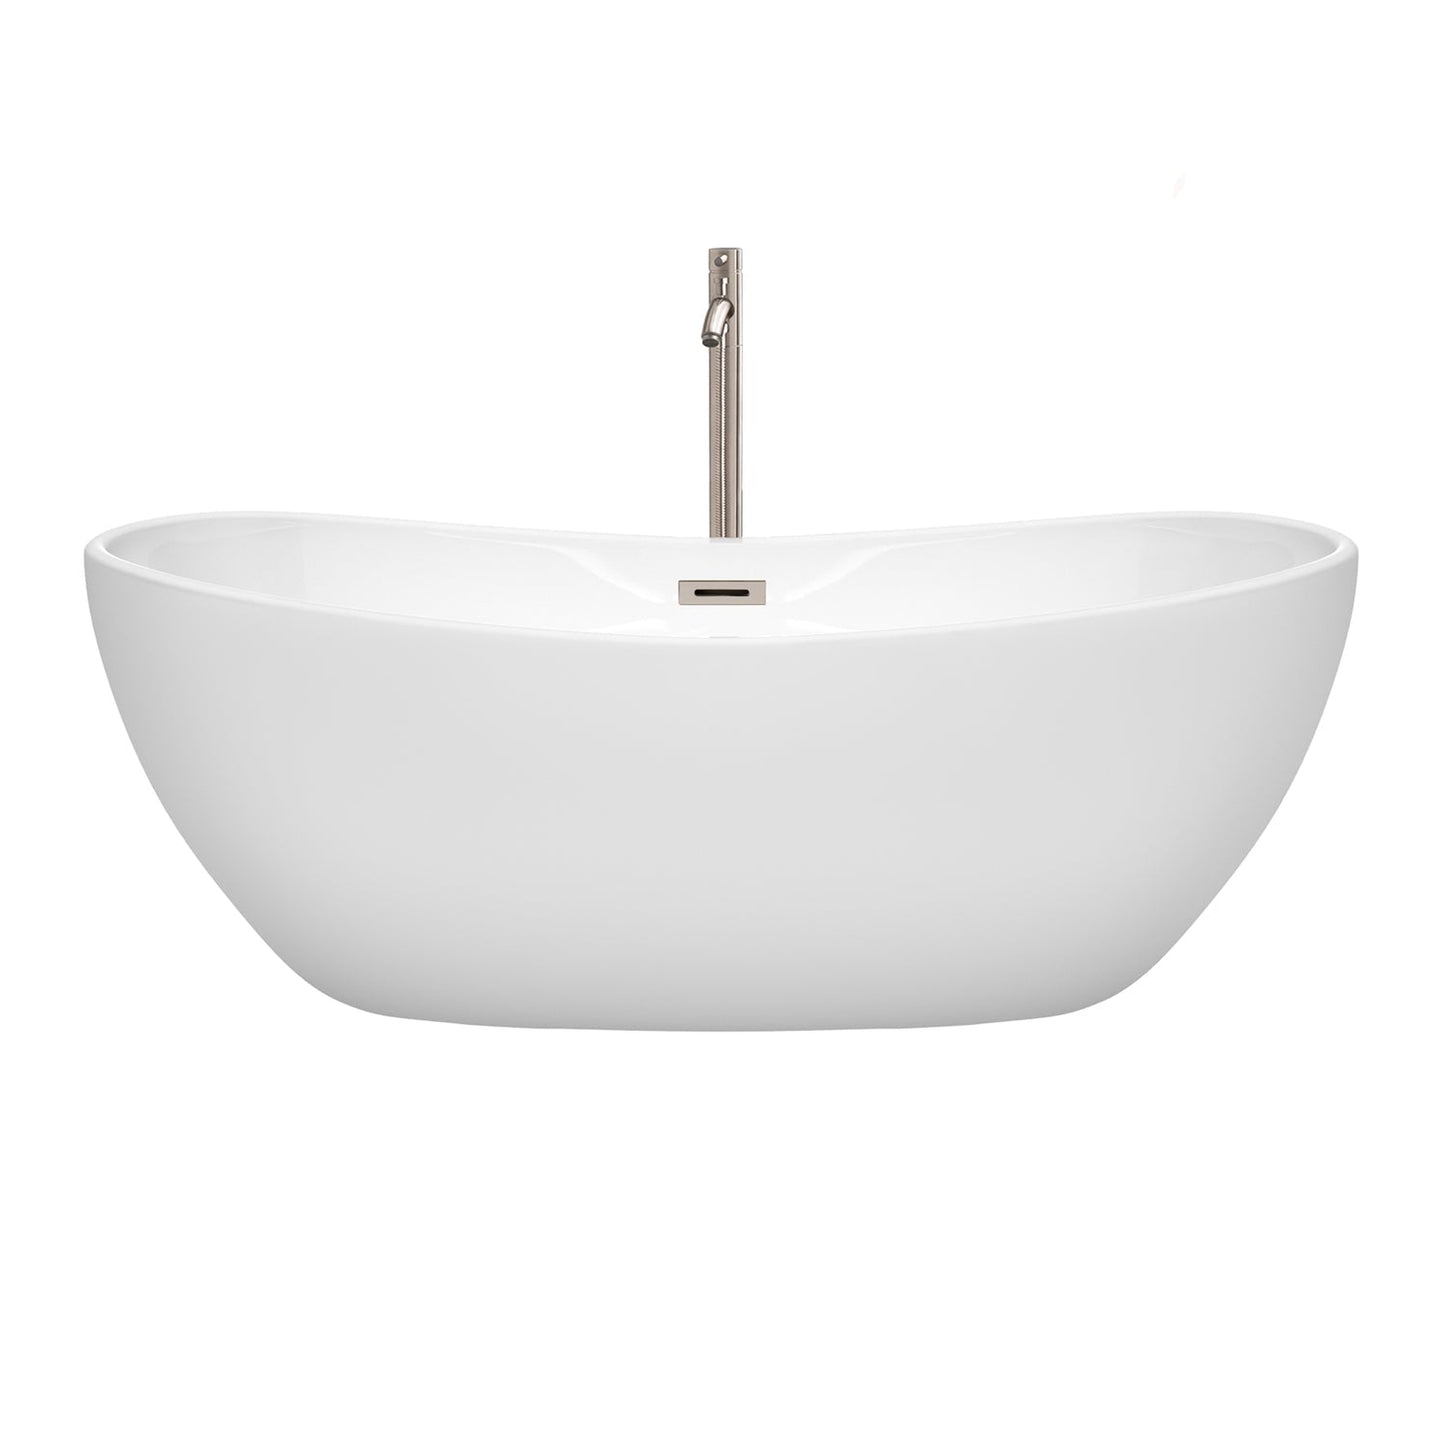 Wyndham Collection Rebecca 65" Freestanding Bathtub in White With Floor Mounted Faucet, Drain and Overflow Trim in Brushed Nickel